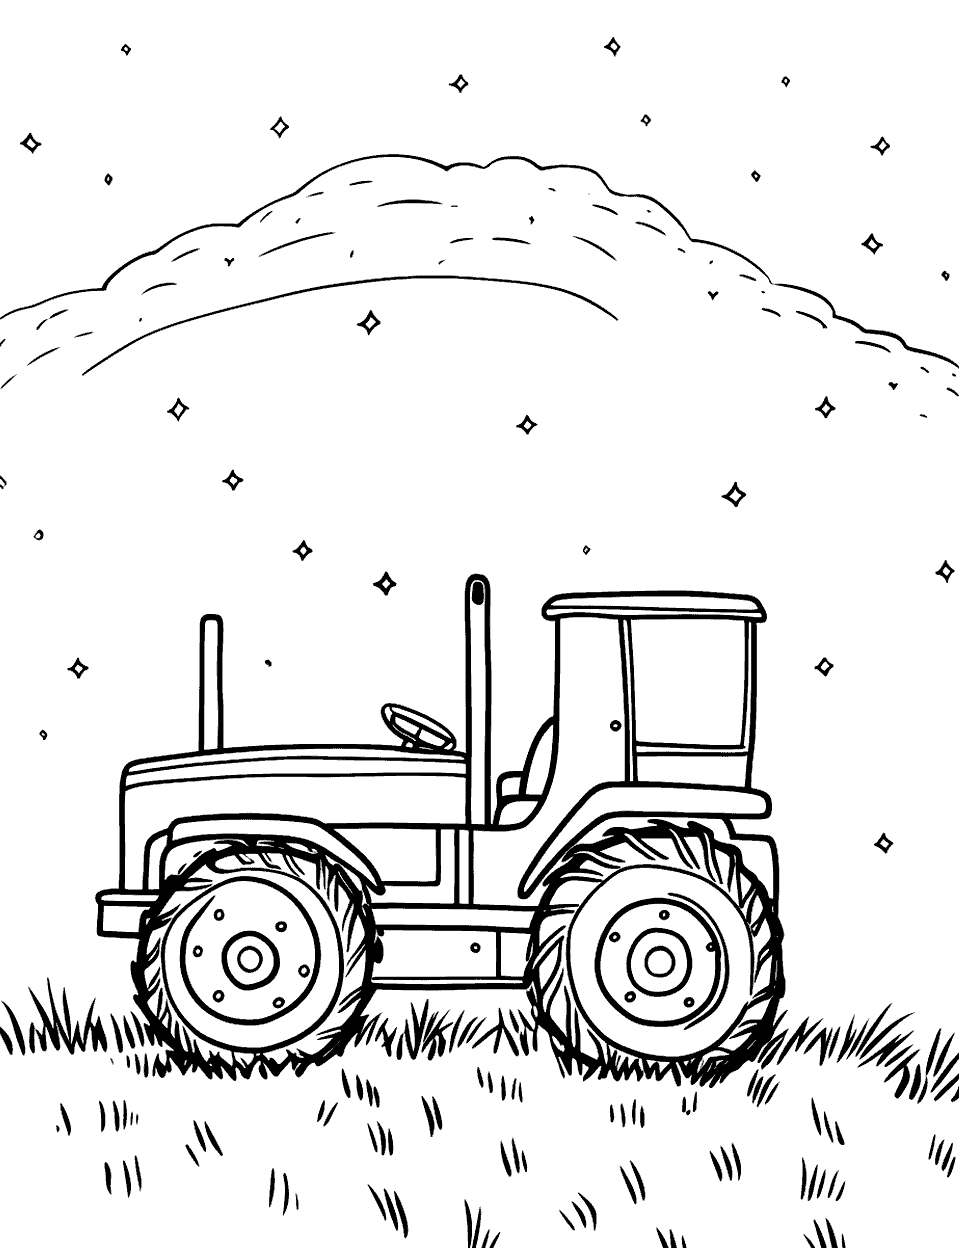 Tractor Under the Stars Coloring Page - A night scene with a tractor silhouetted against a starry sky.